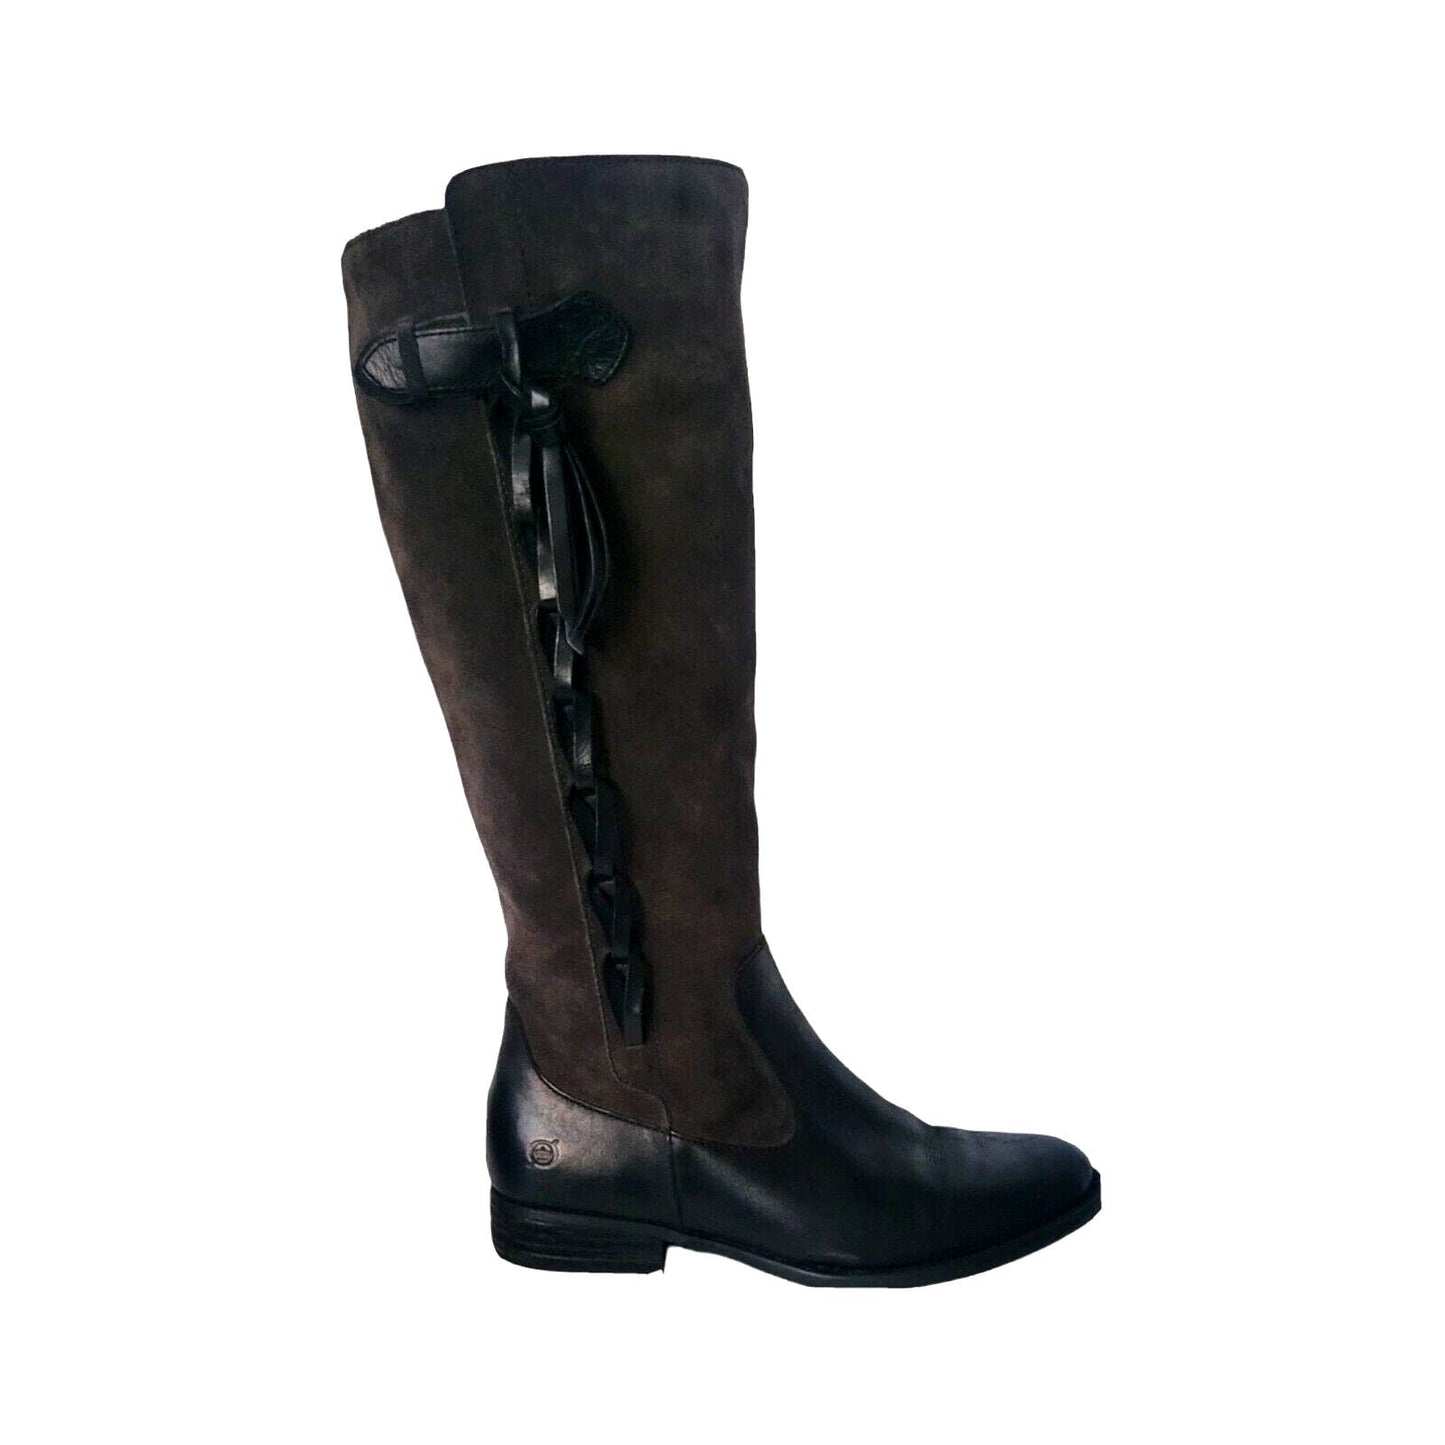 (Used) Born Cook Black/Dark Grey Leather Riding Women Boots Size 8 M